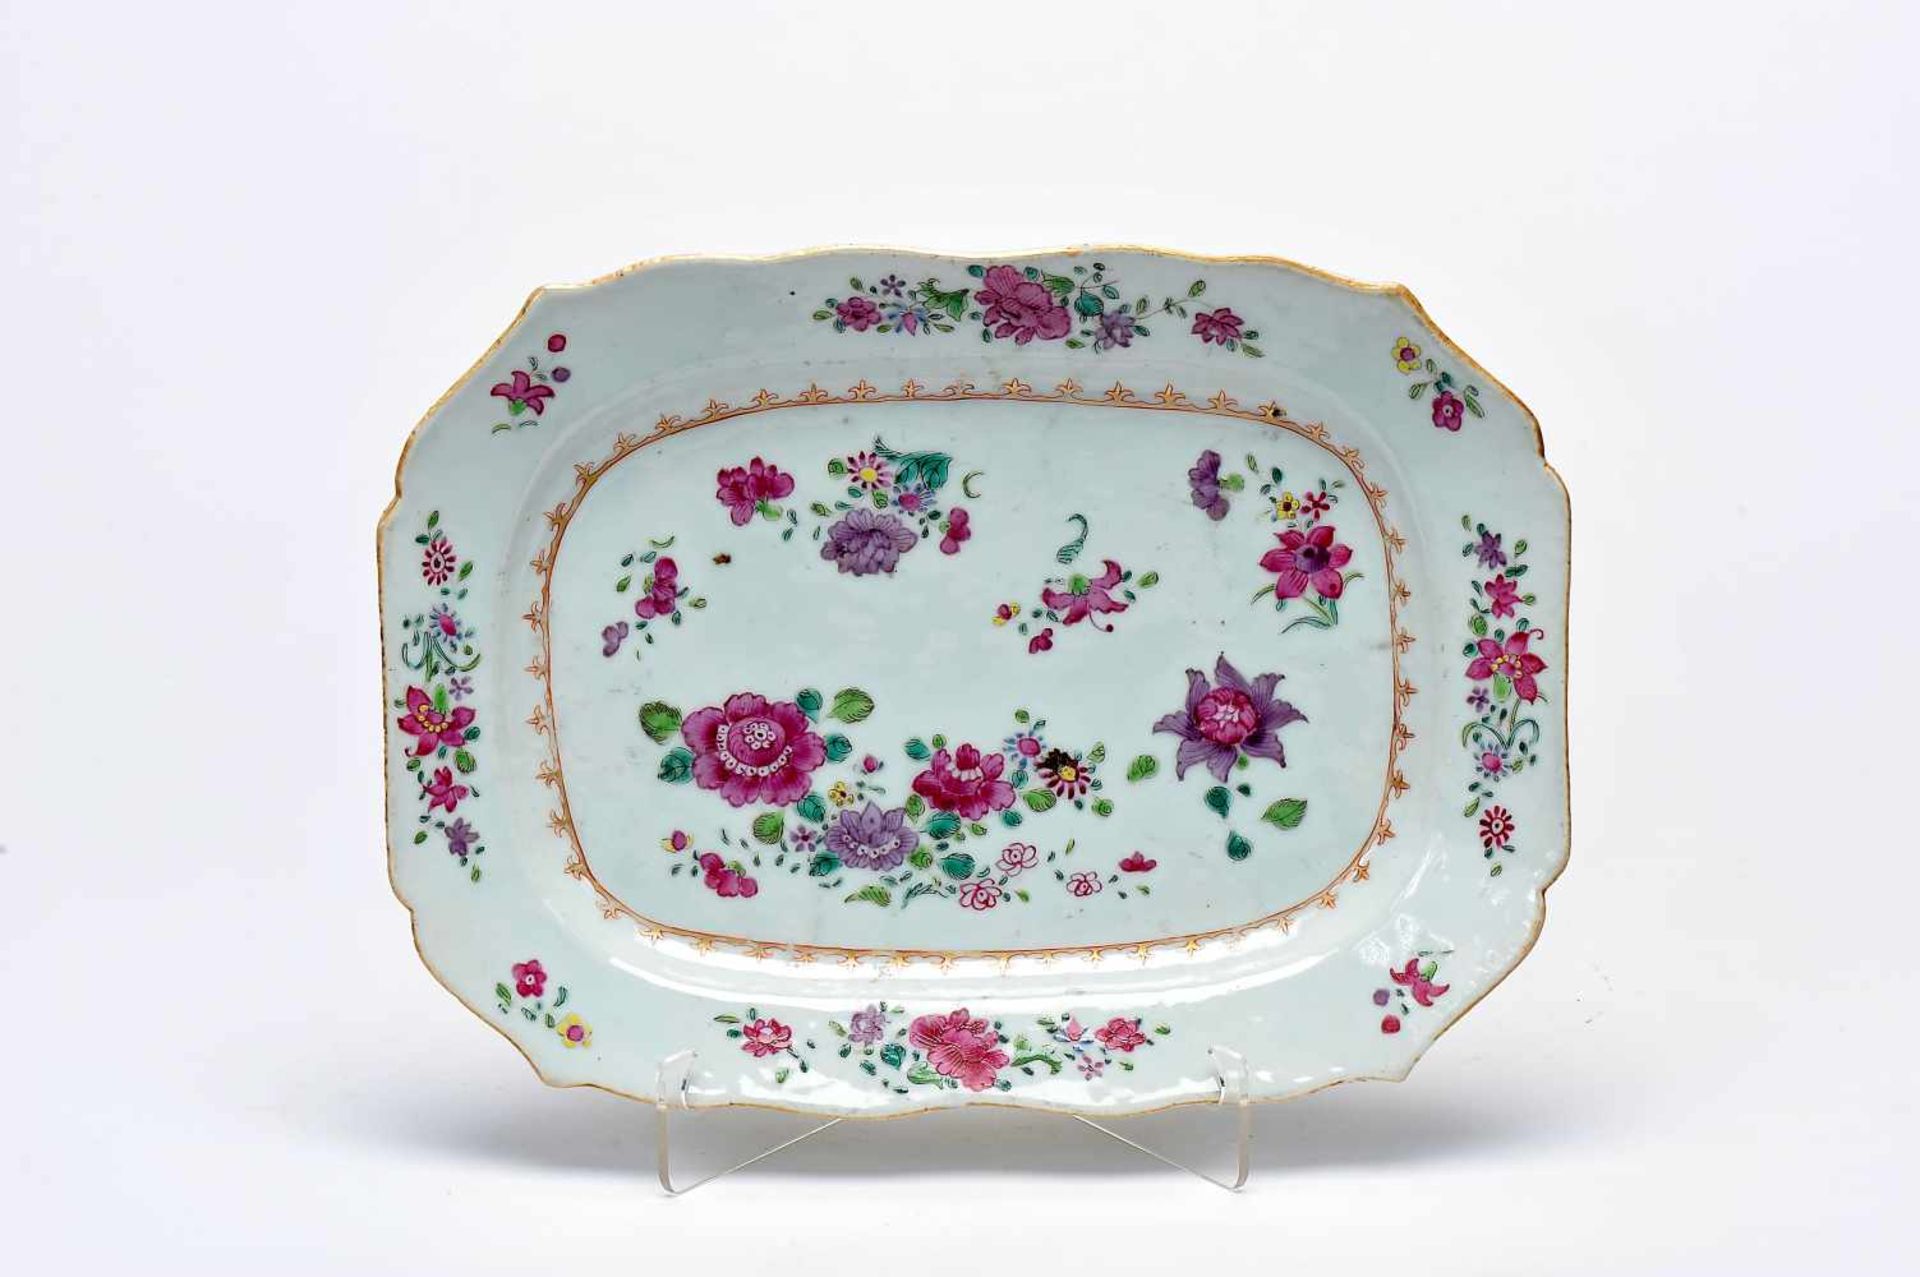 A Scalloped Platter, Chinese export porcelain, polychrome decoration "Flowers", Qianlong period (